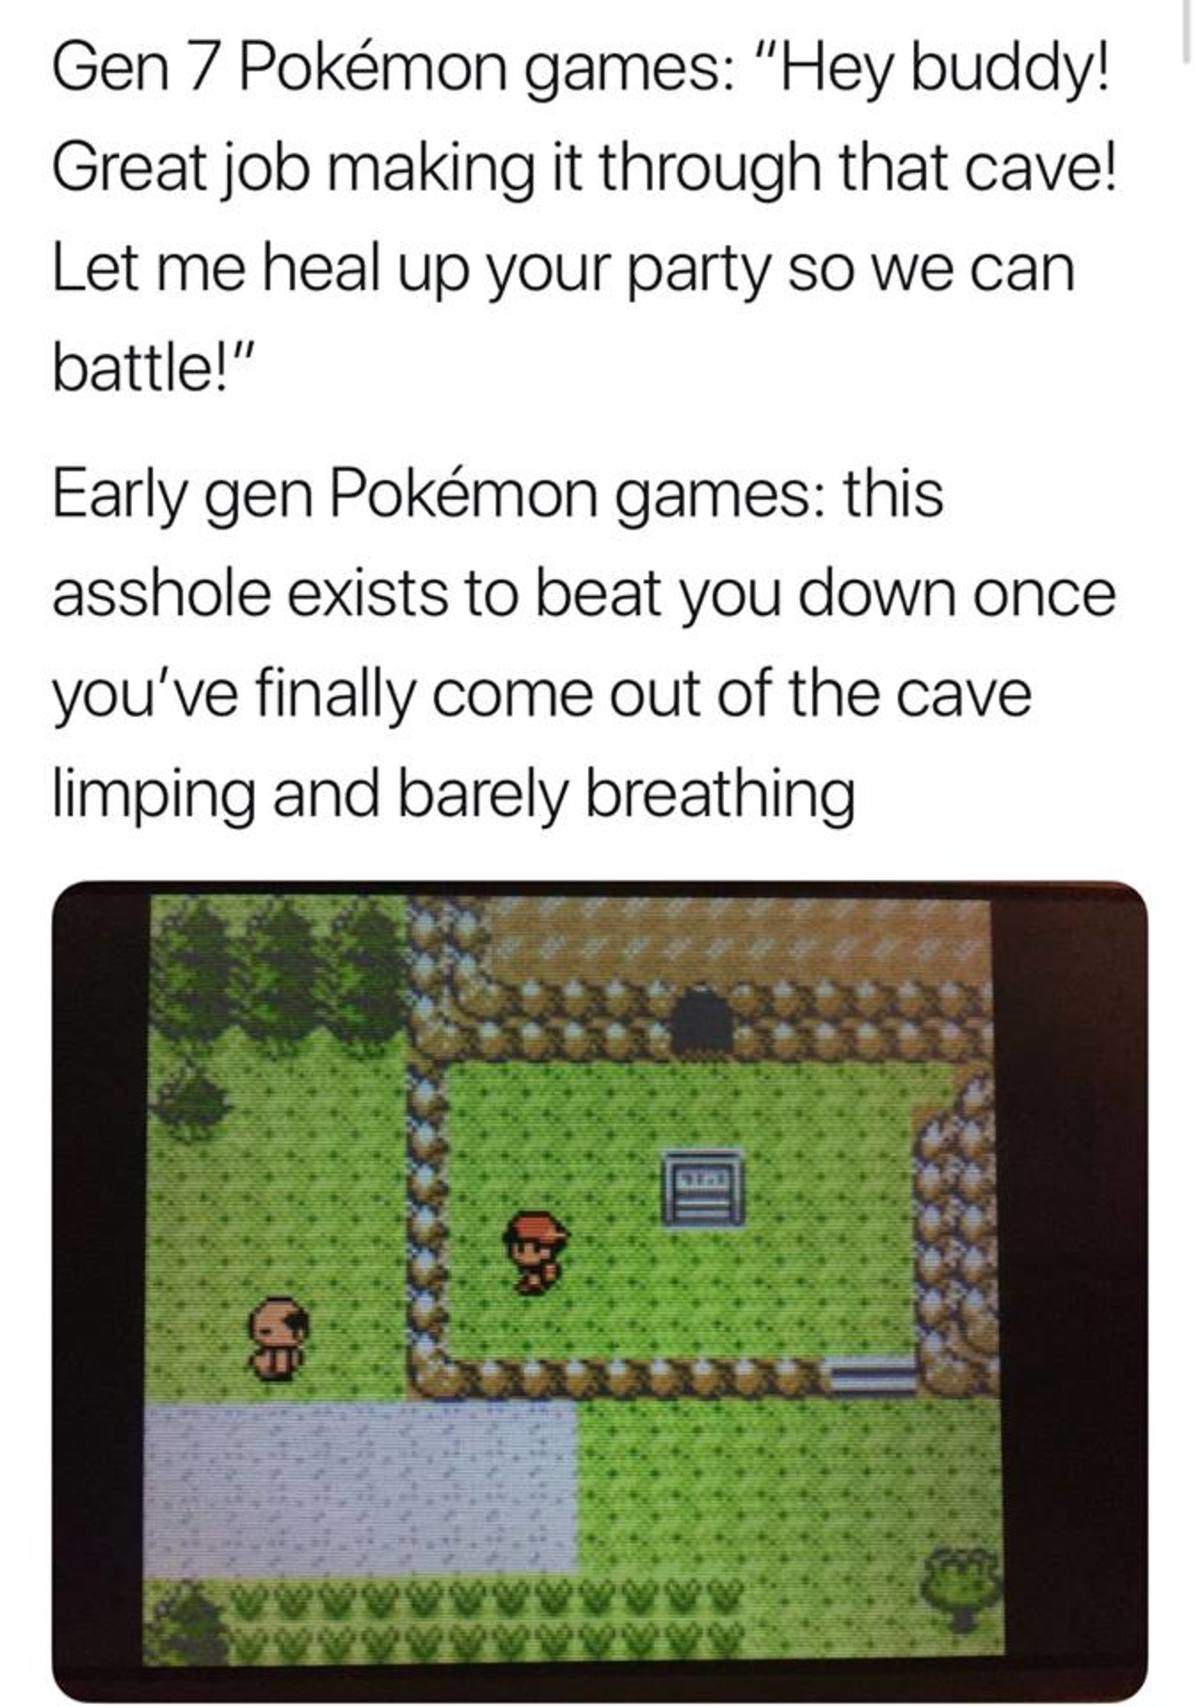 memes funny 2018 dank pokemon memes - Gen 7 Pokmon games "Hey buddy! Great job making it through that cave! Let me heal up your party so we can battle!" Early gen Pokmon games this asshole exists to beat you down once you've finally come out of the cave l